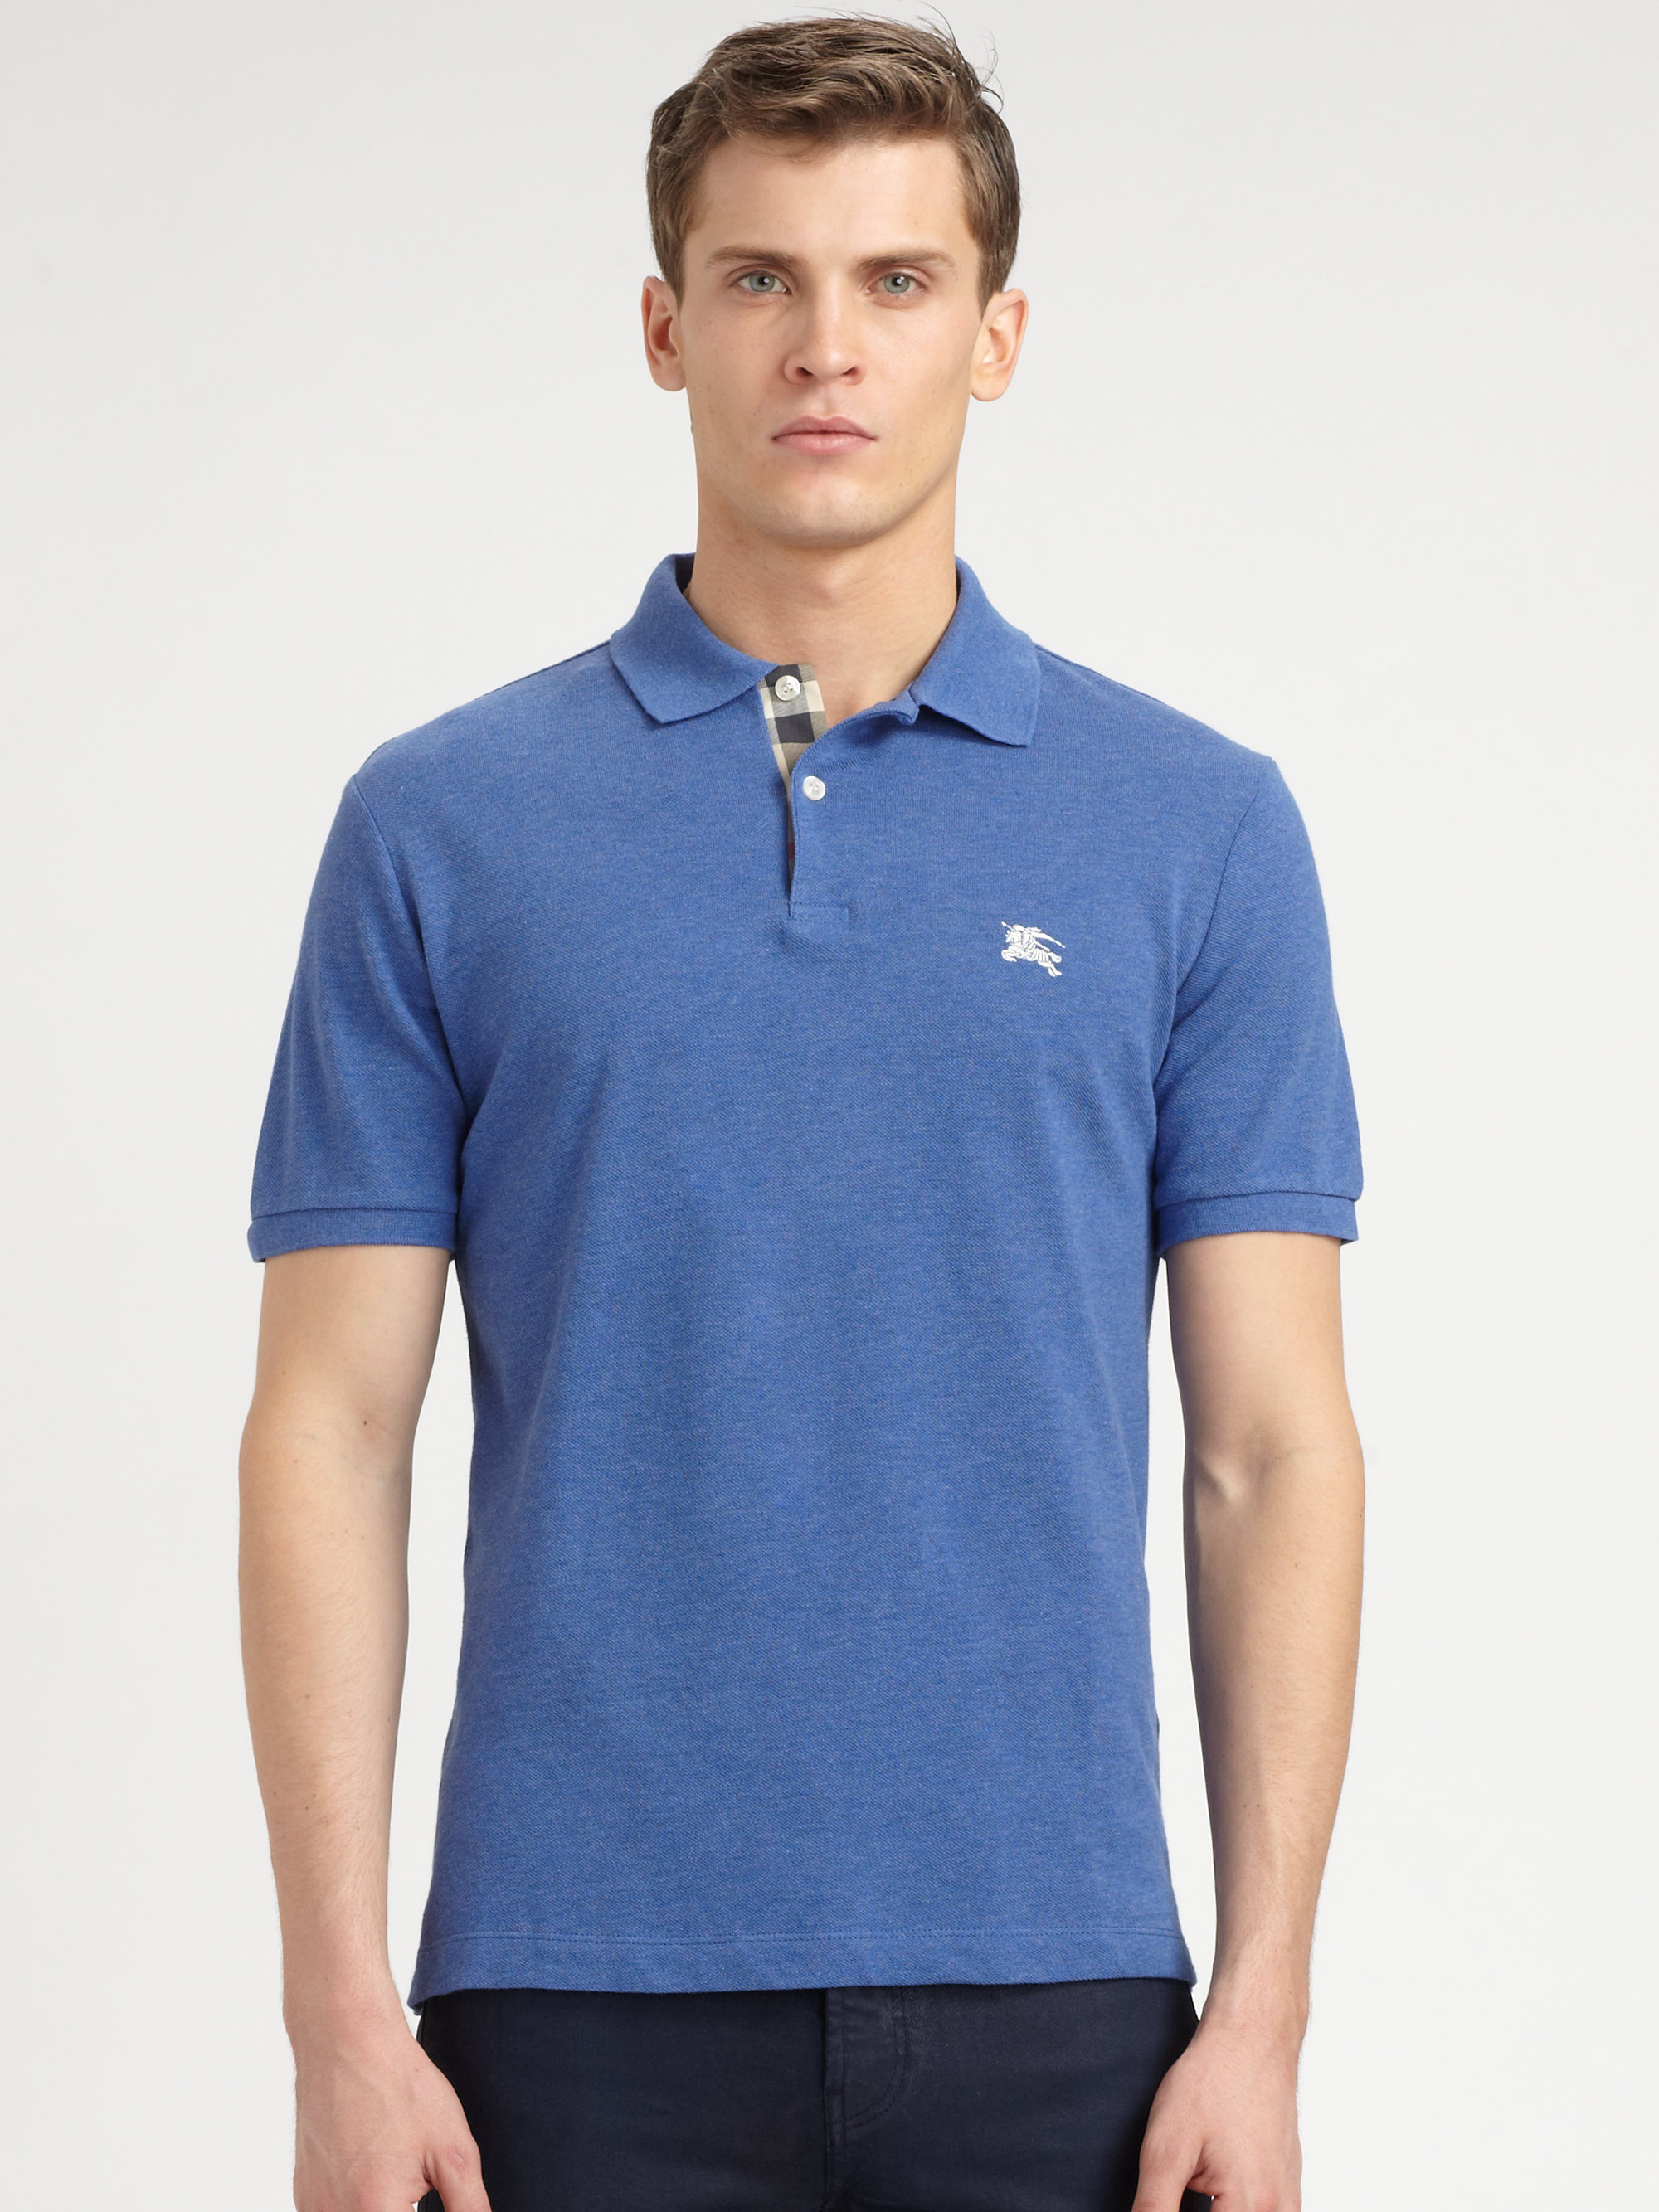 Burberry Brit Cotton Polo Shirt in Blue for Men - Lyst